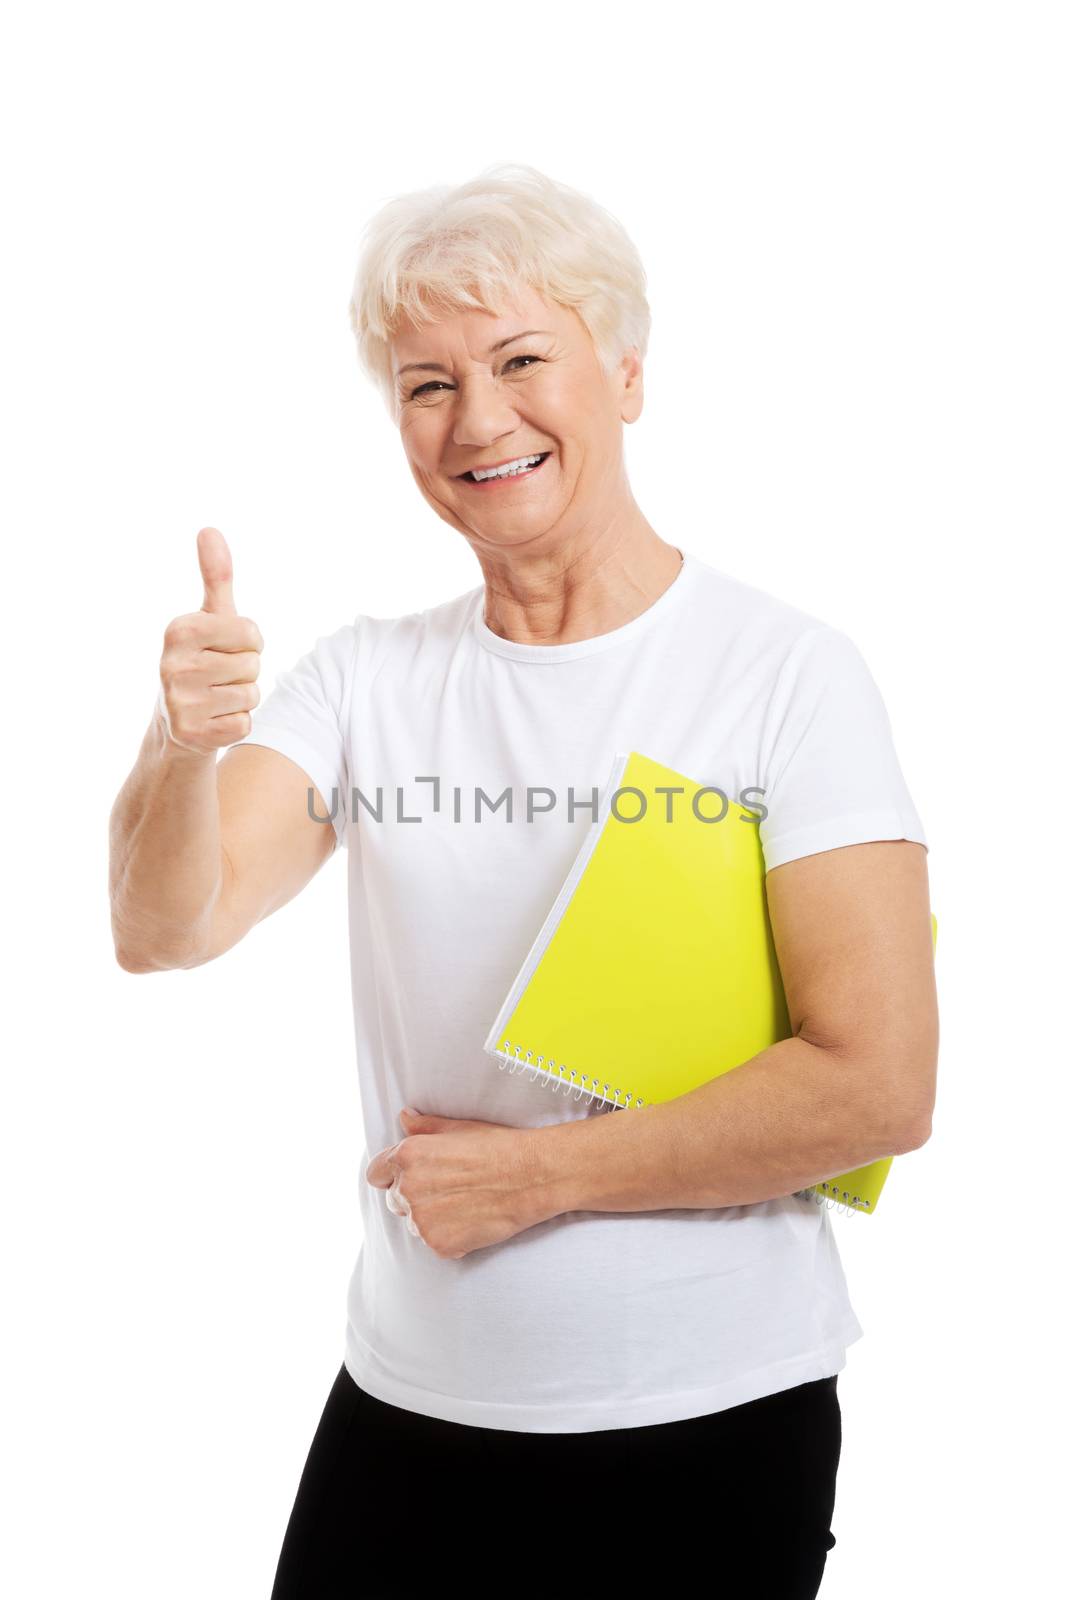 An old woman holding workbook and showing OK. Isolated on white.